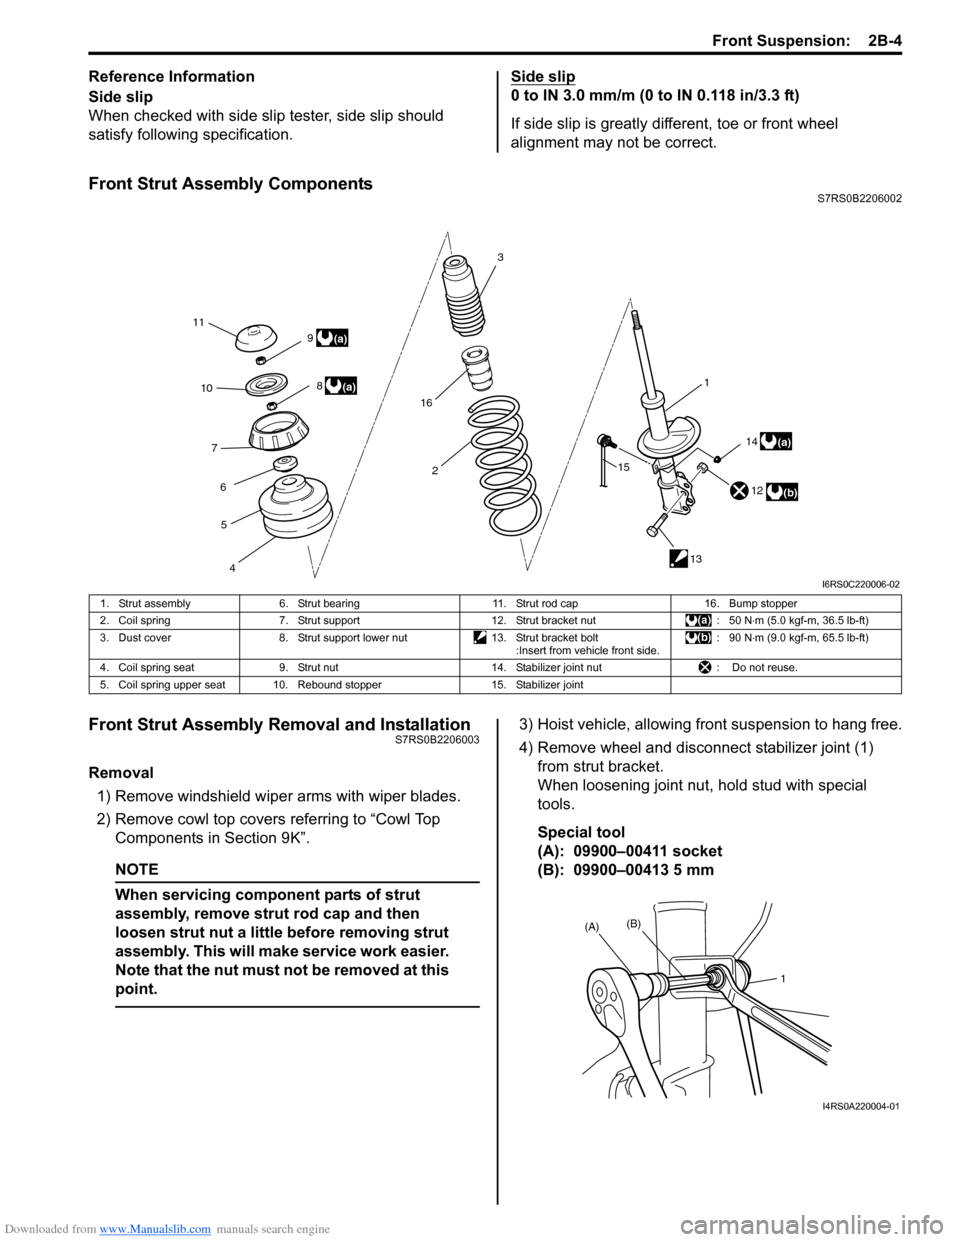 SUZUKI SWIFT 2006 2.G Service Service Manual Downloaded from www.Manualslib.com manuals search engine Front Suspension:  2B-4
Reference Information
Side slip
When checked with side slip tester, side slip should 
satisfy following specification.S